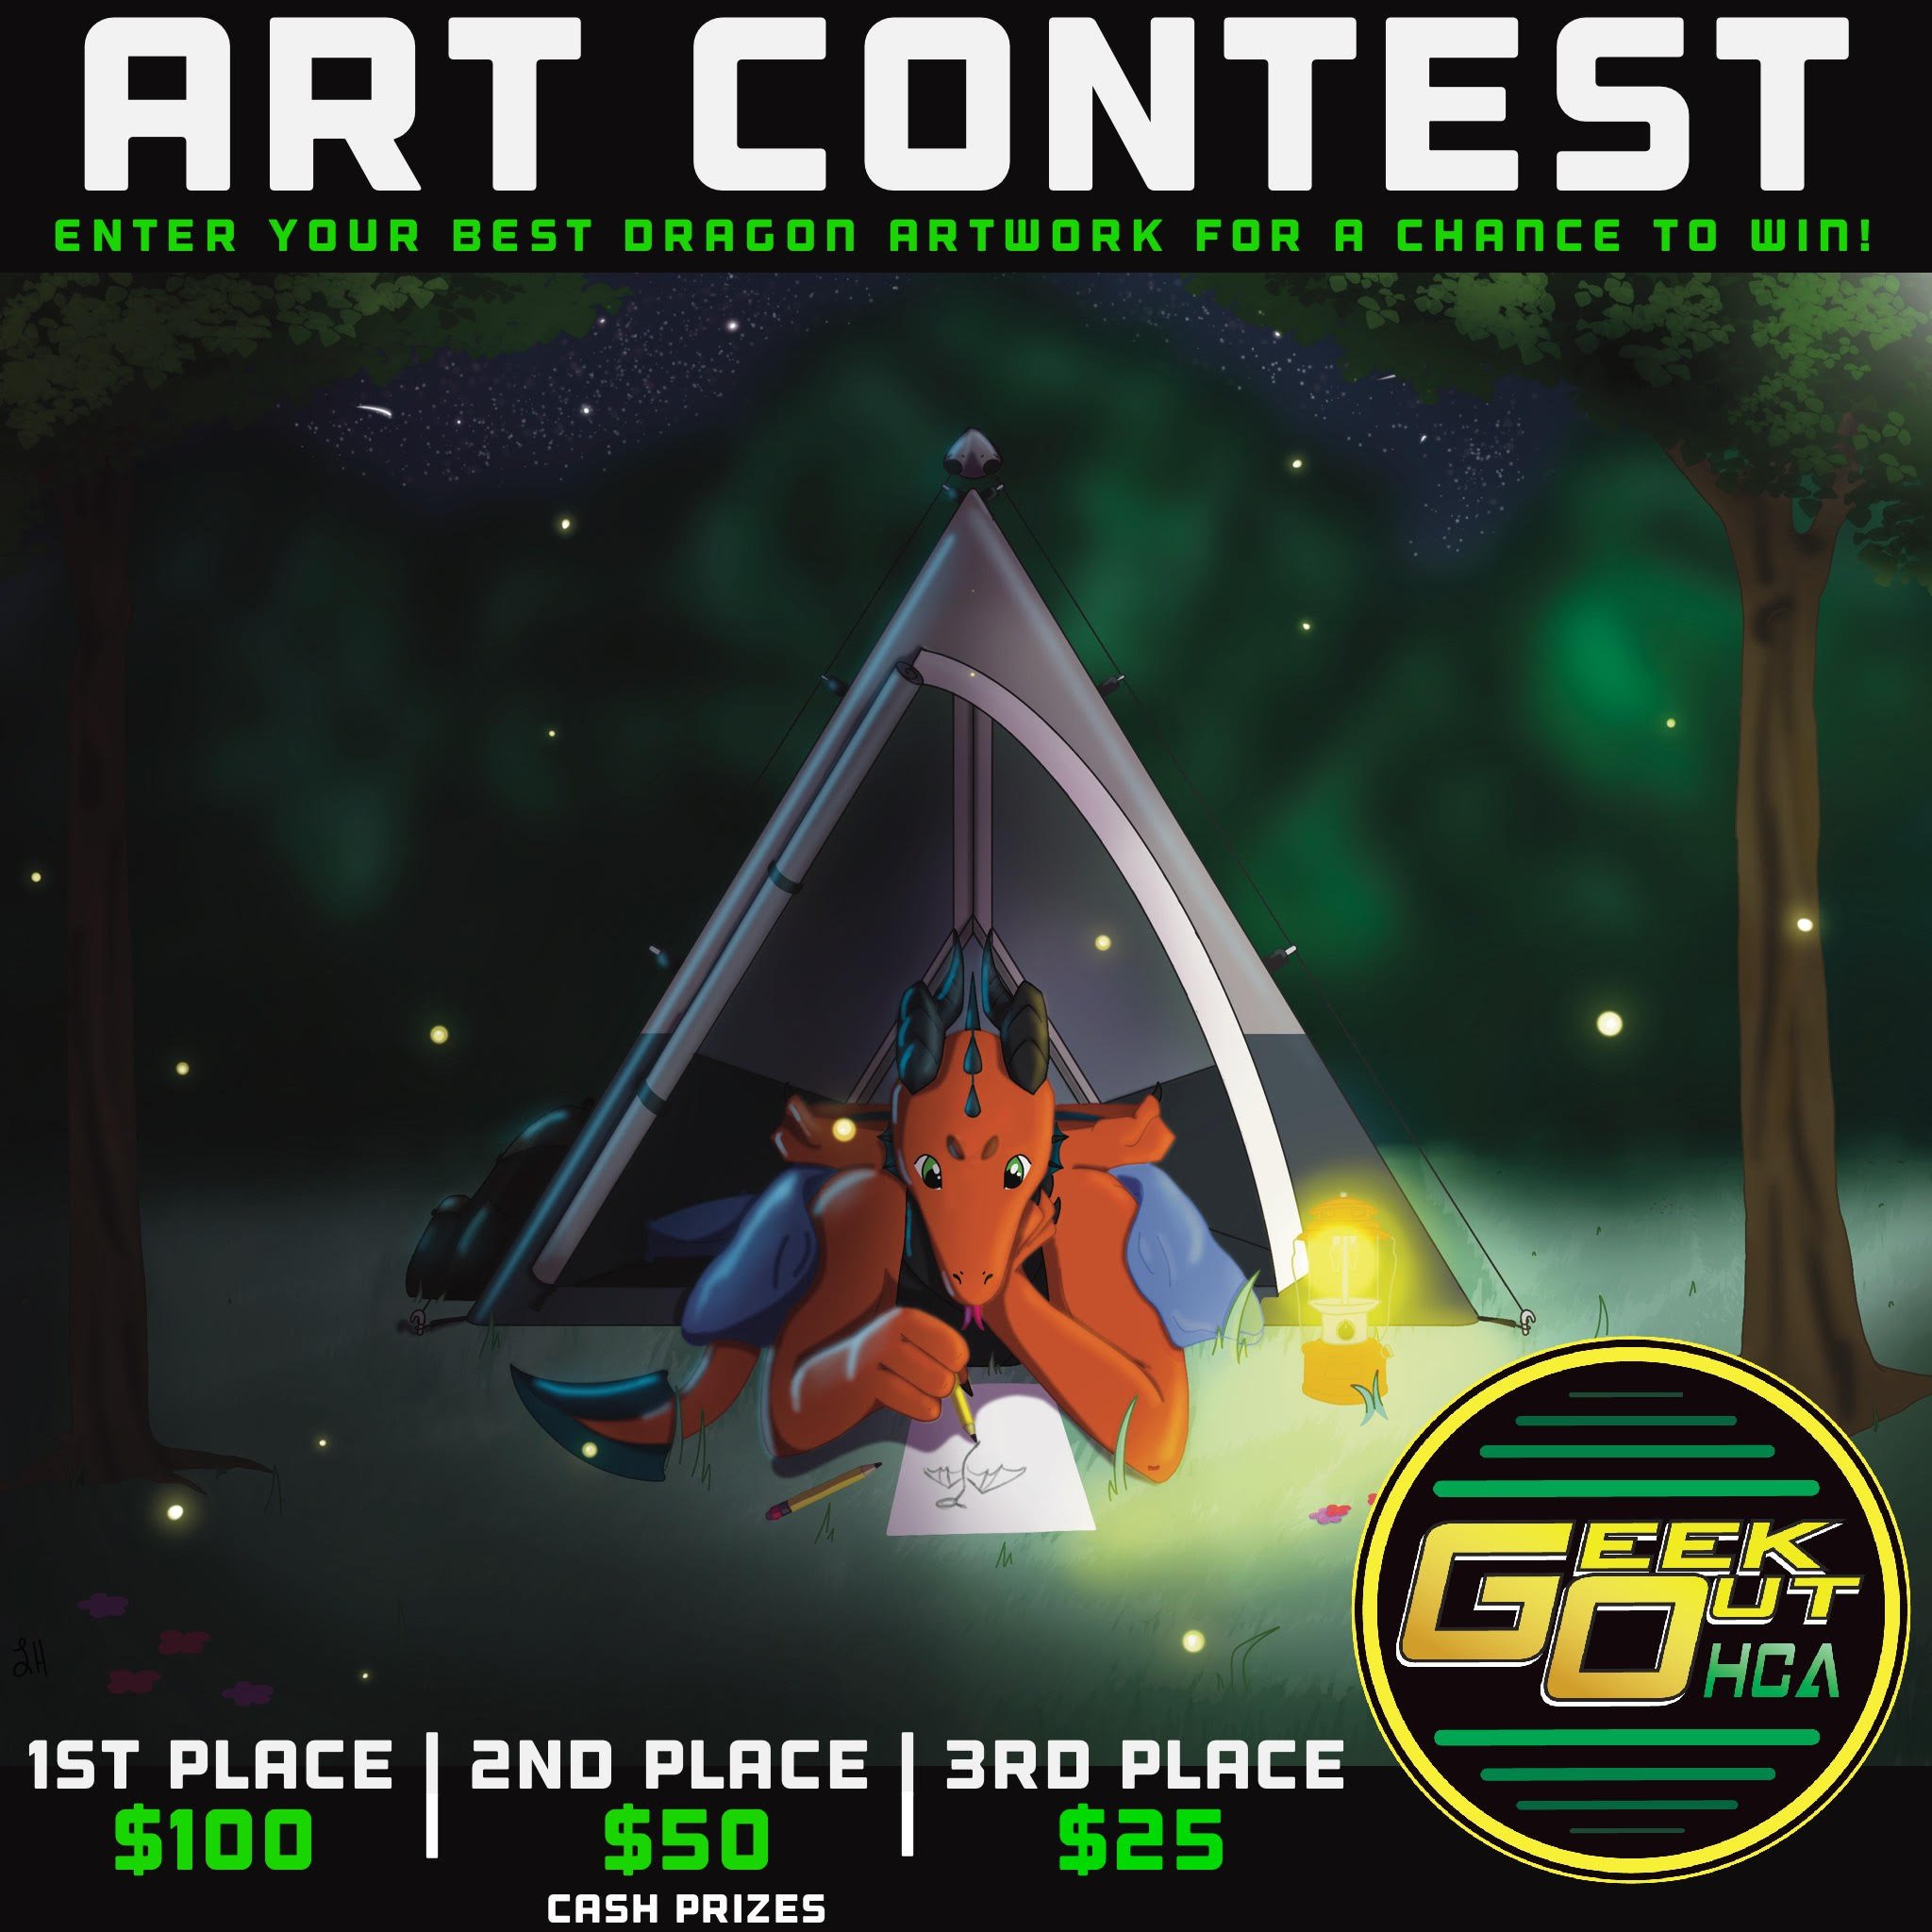   Reminder to get your art ready if you're planning on competing in the art contest! Show us what you got  